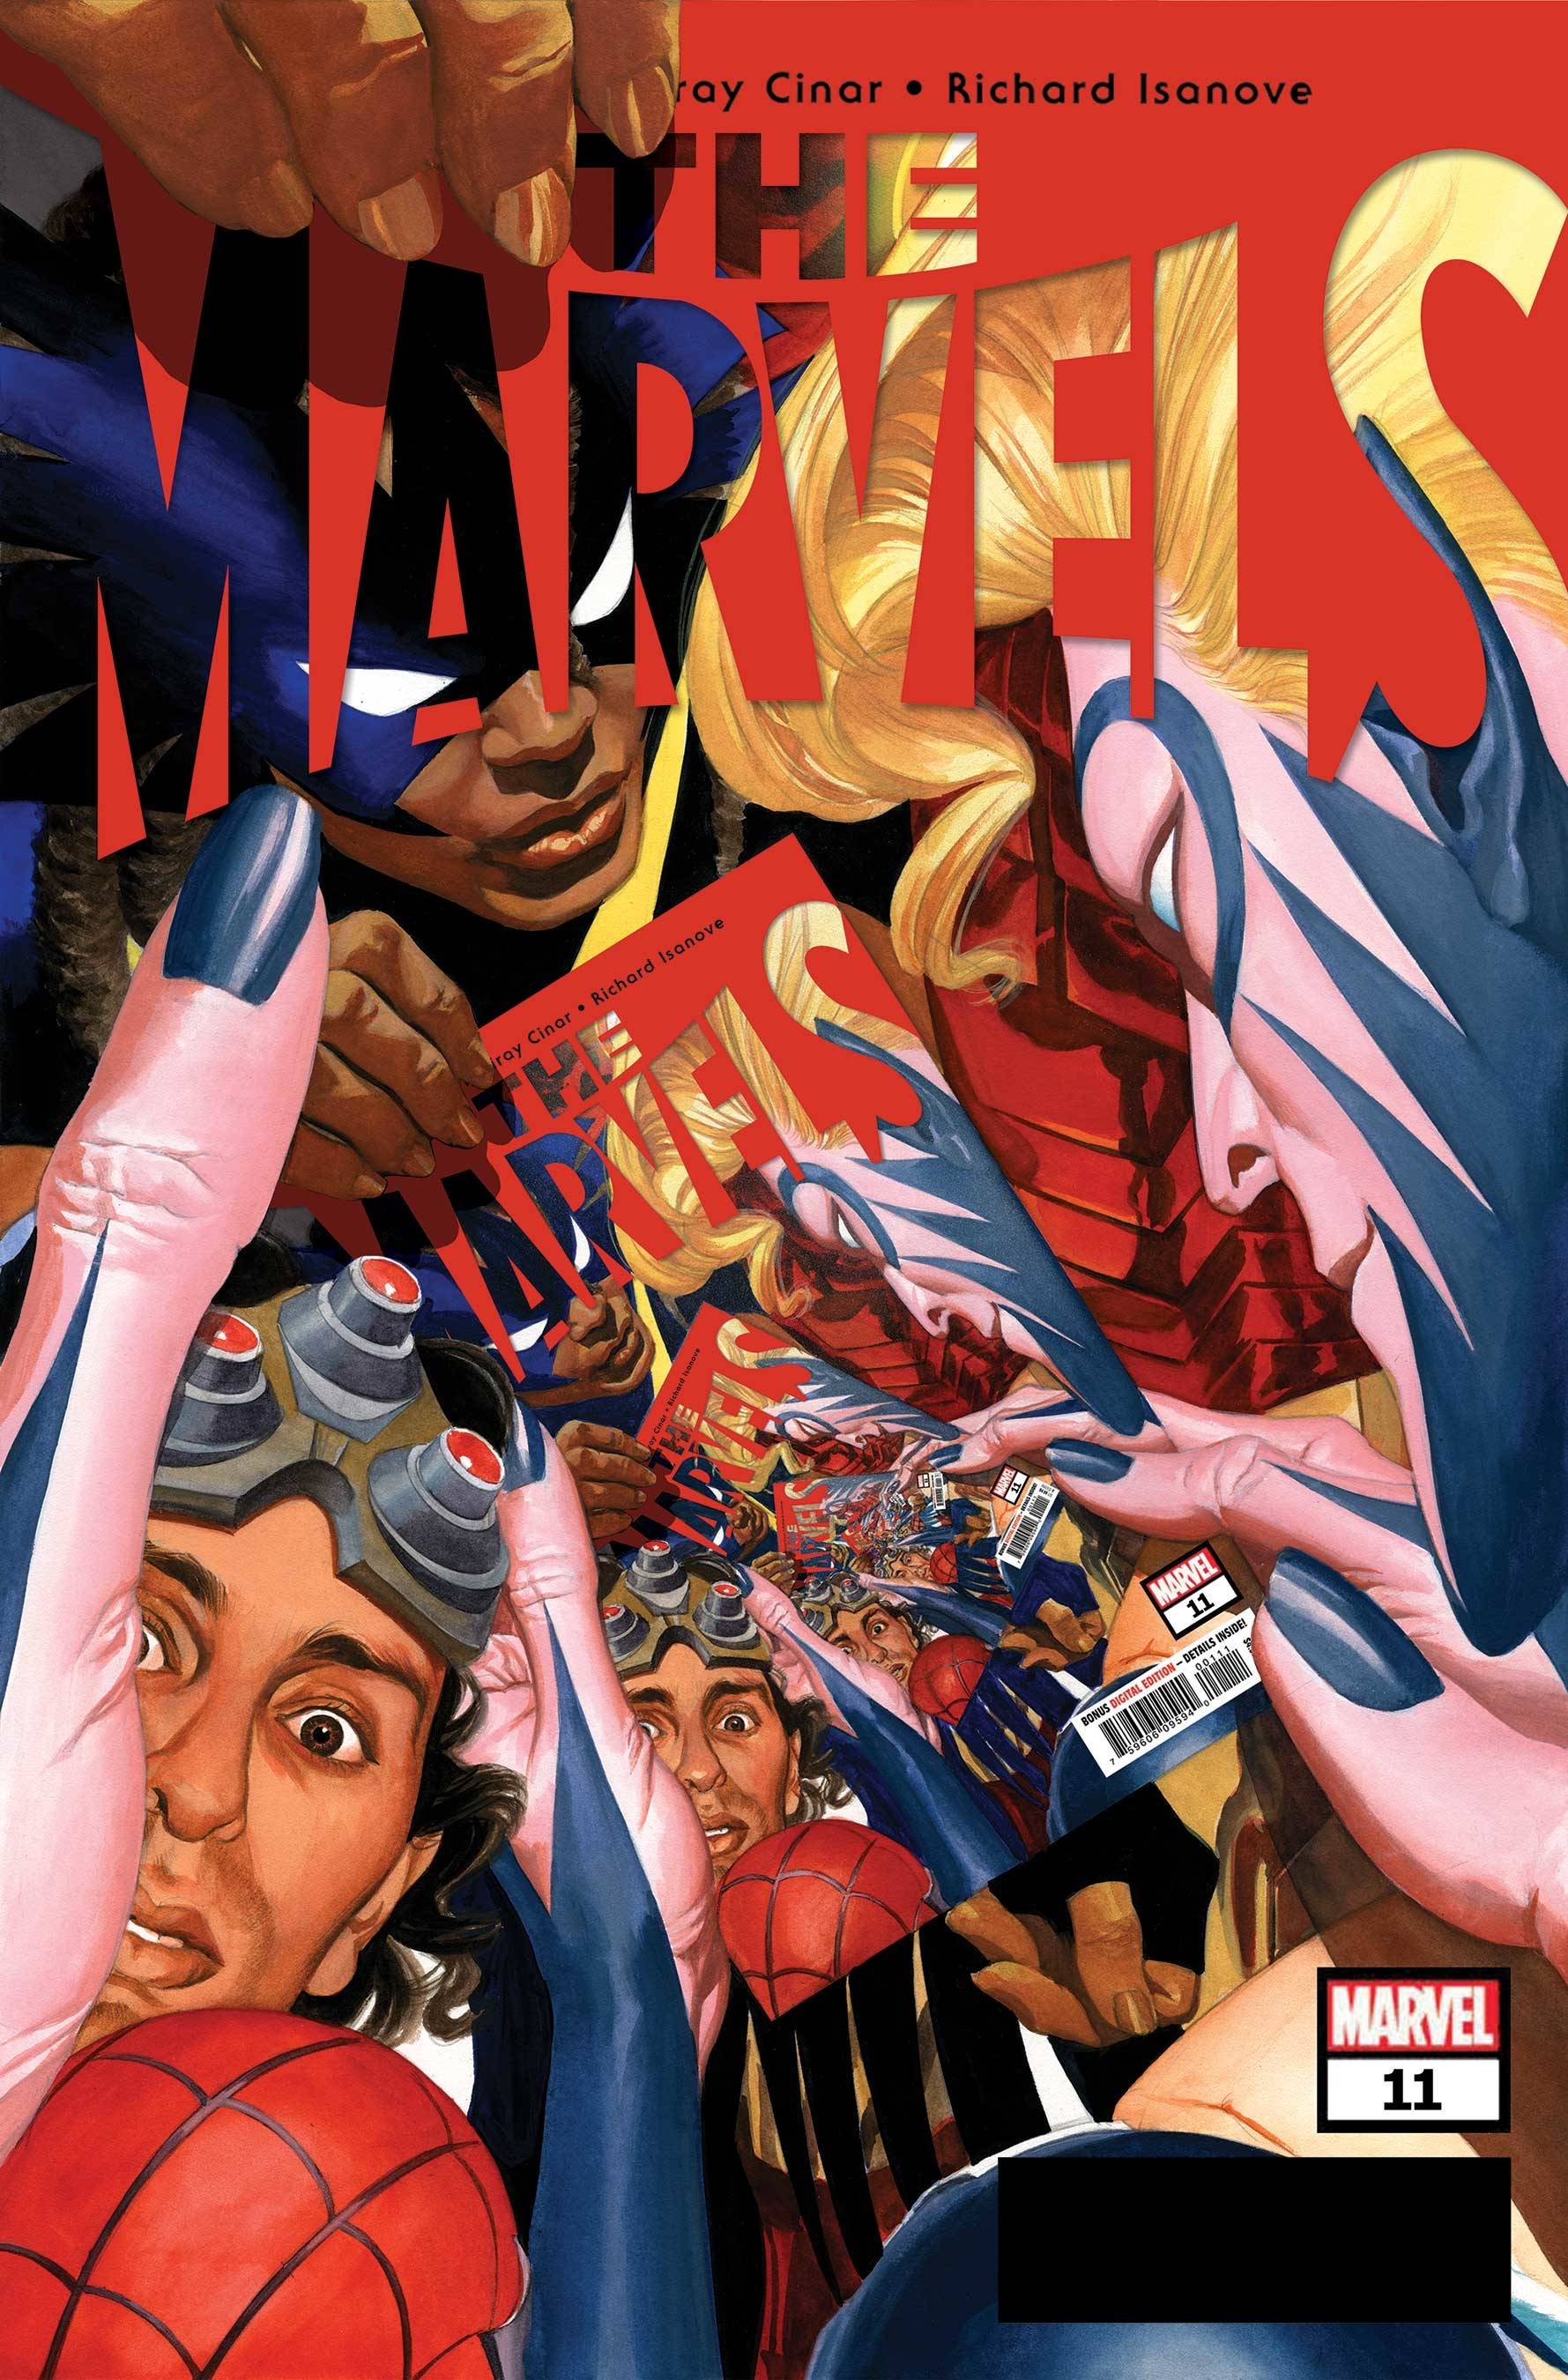 THE MARVELS #11